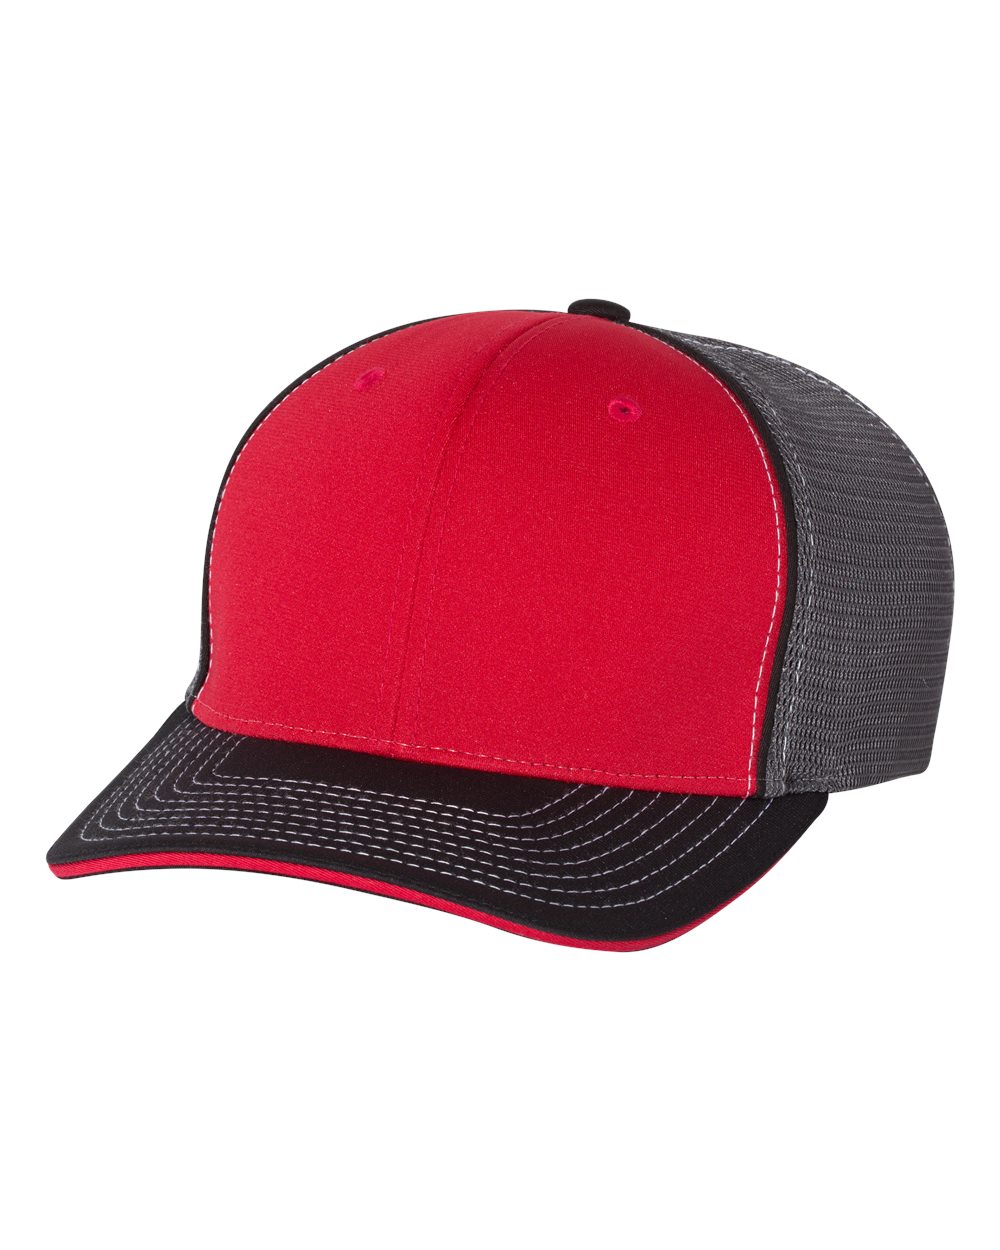 click to view Red/ Charcoal/ Black Tri